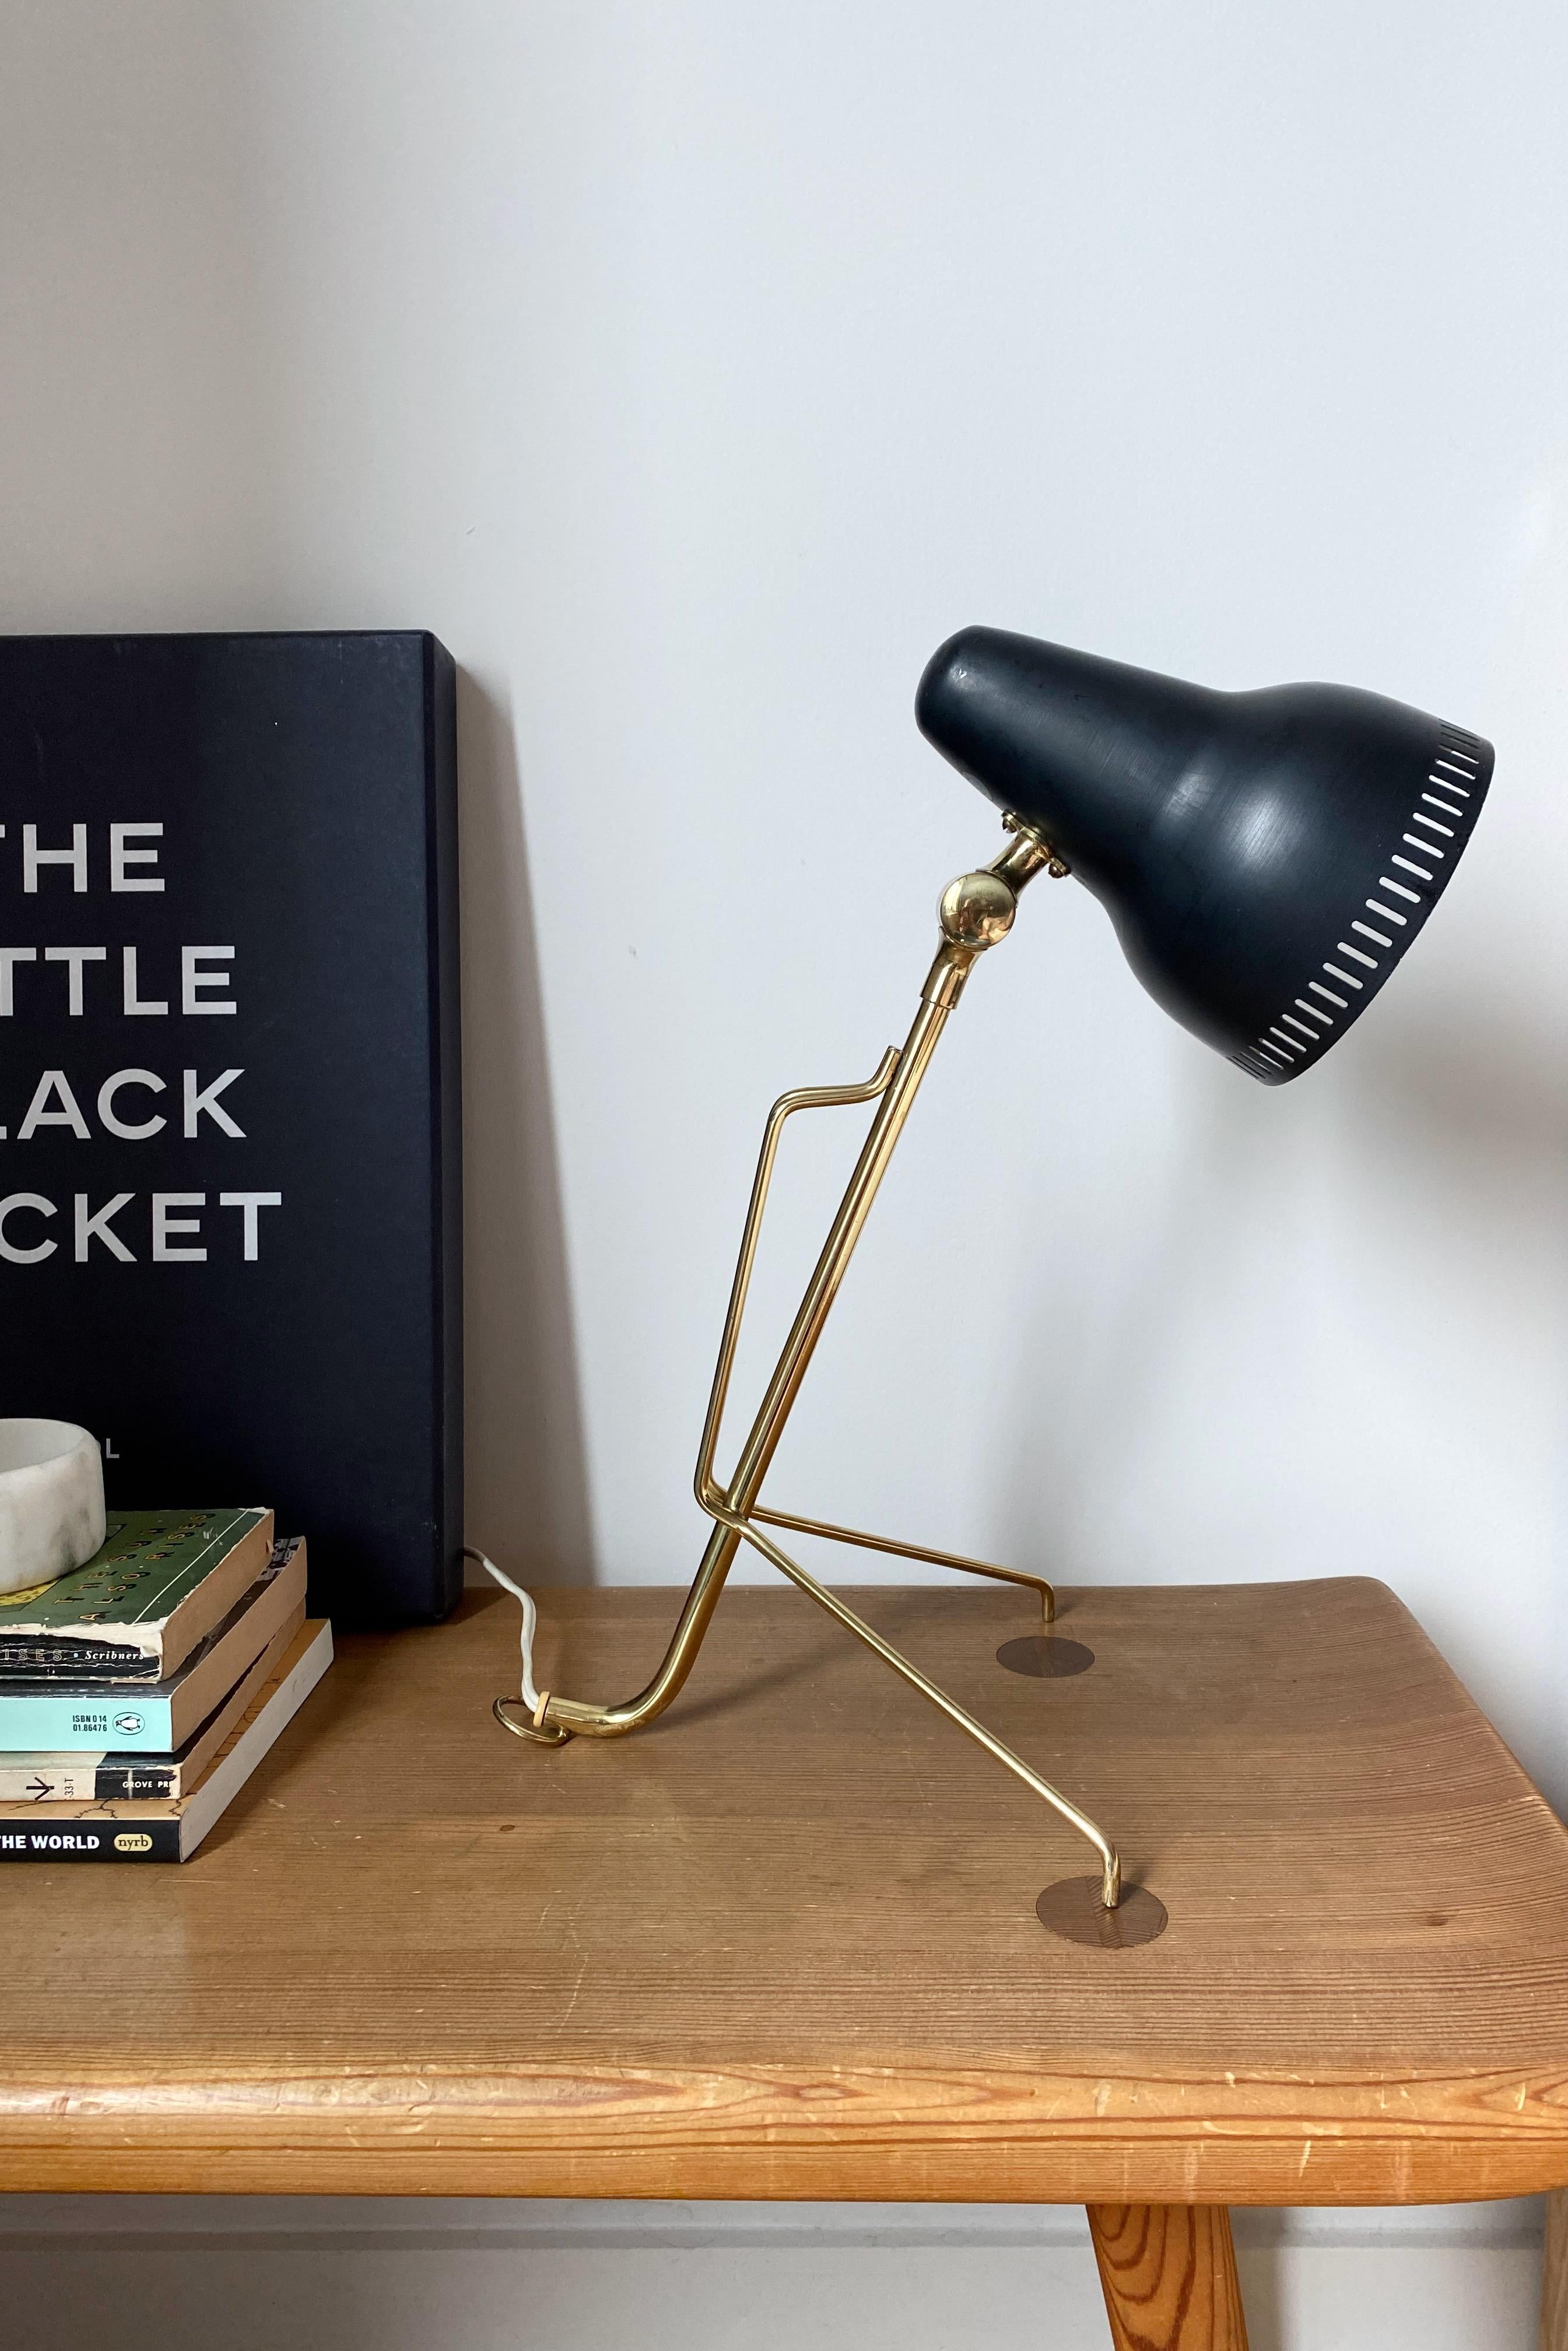 Beautiful 1950's Metal and Brass Table lamp by Falkenbergs, Sweden. 2 brass spider legs support the lamp arm and create a unique look. The adjustable lamp shade is of metal and in original black color with small buckles and marks, please see photos.